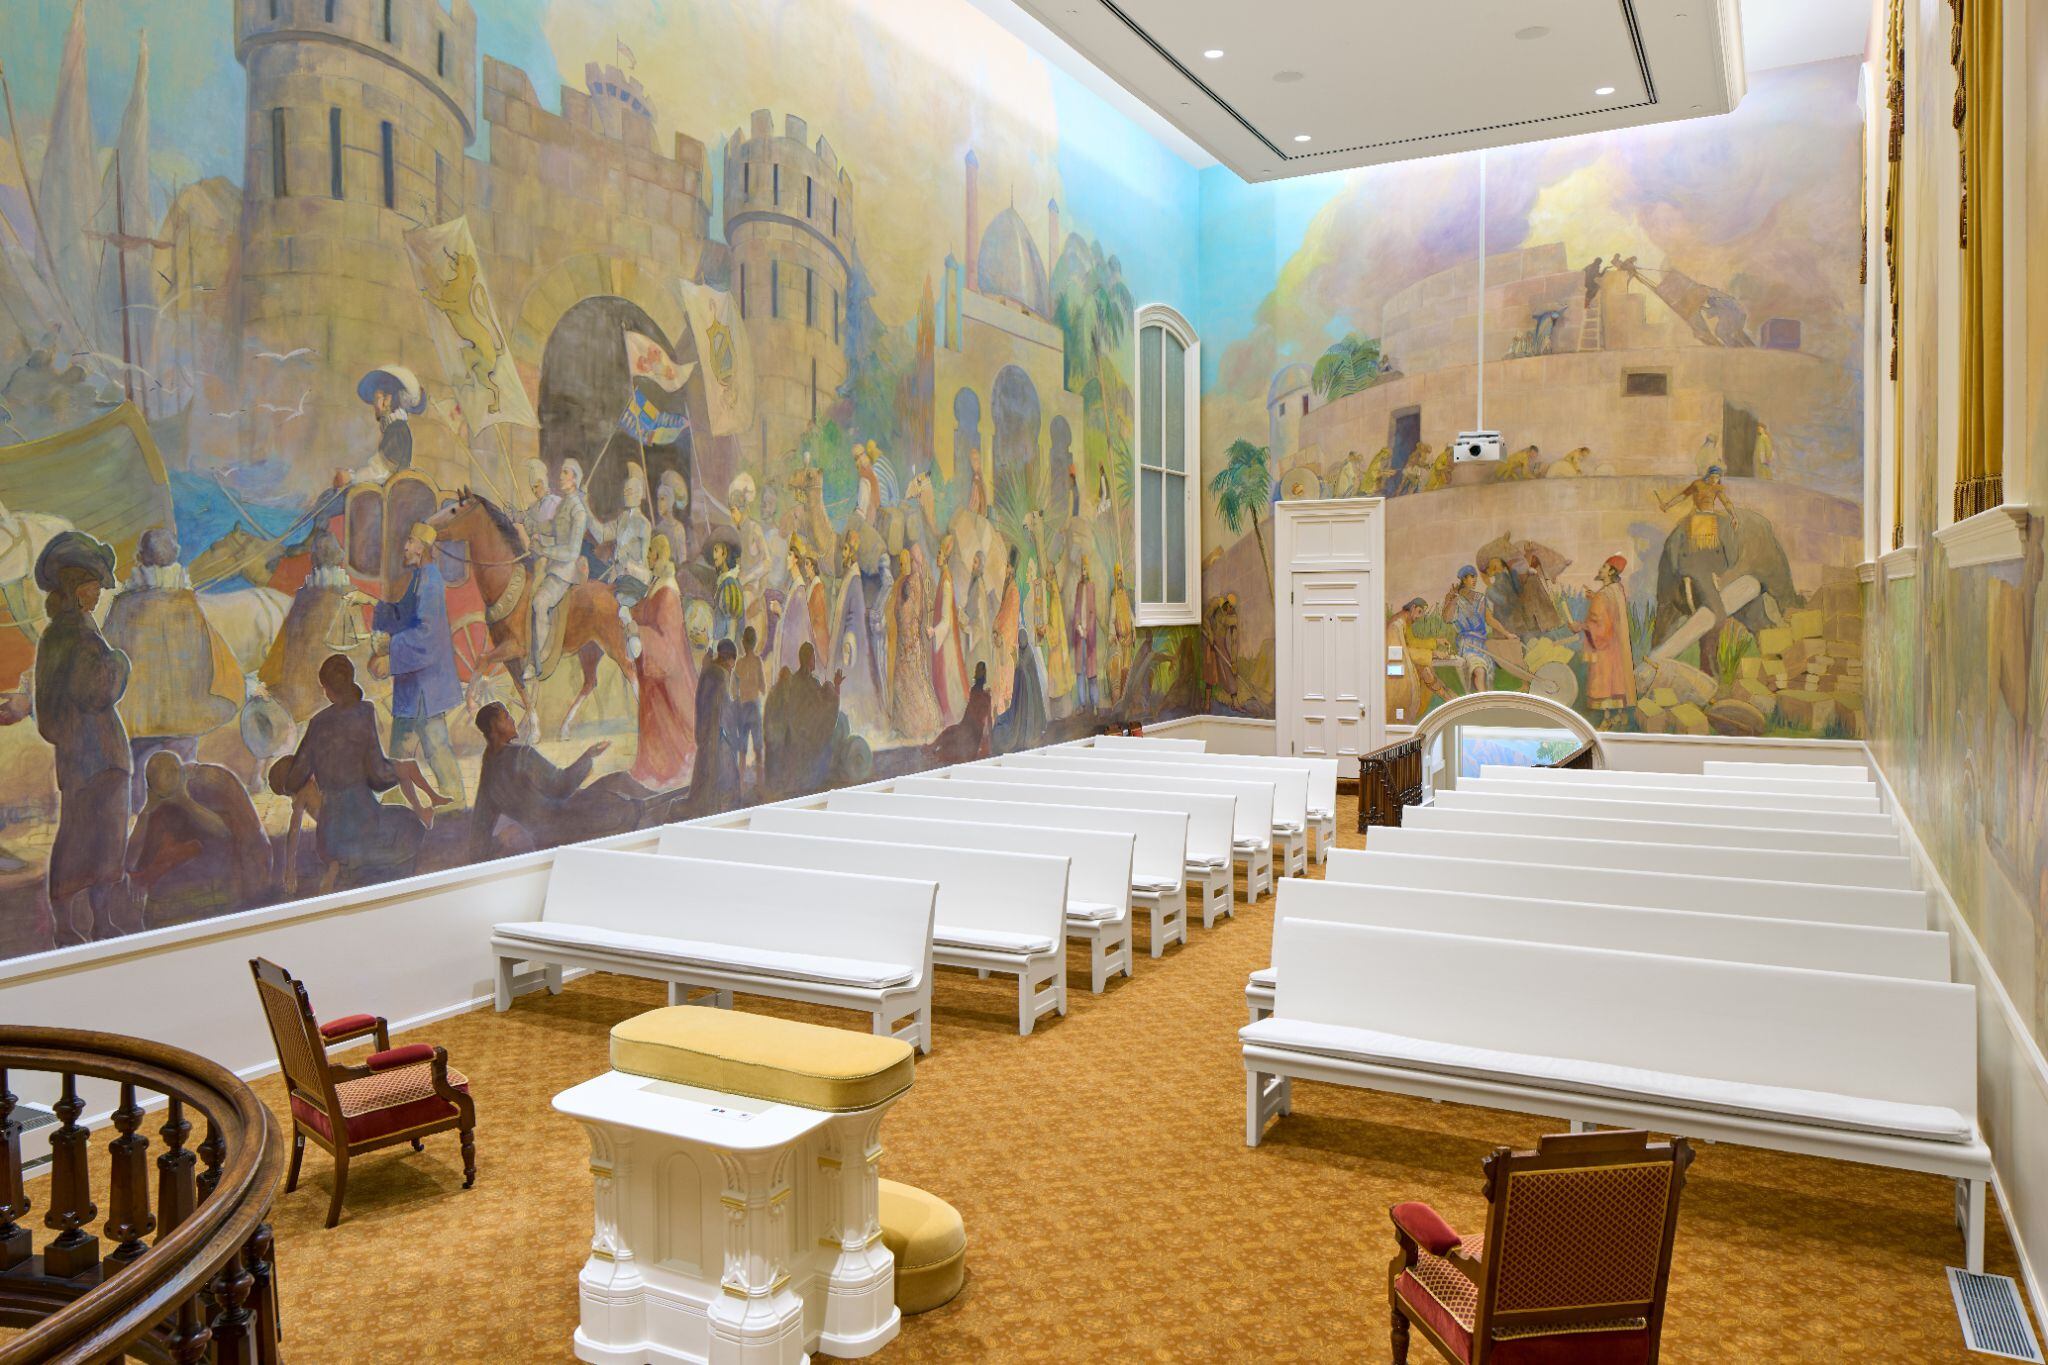 (The Church of Jesus Christ of Latter-day Saints) Ordinance room in the renovated Manti Temple displays the restored and brightened Minerva Teichert murals.